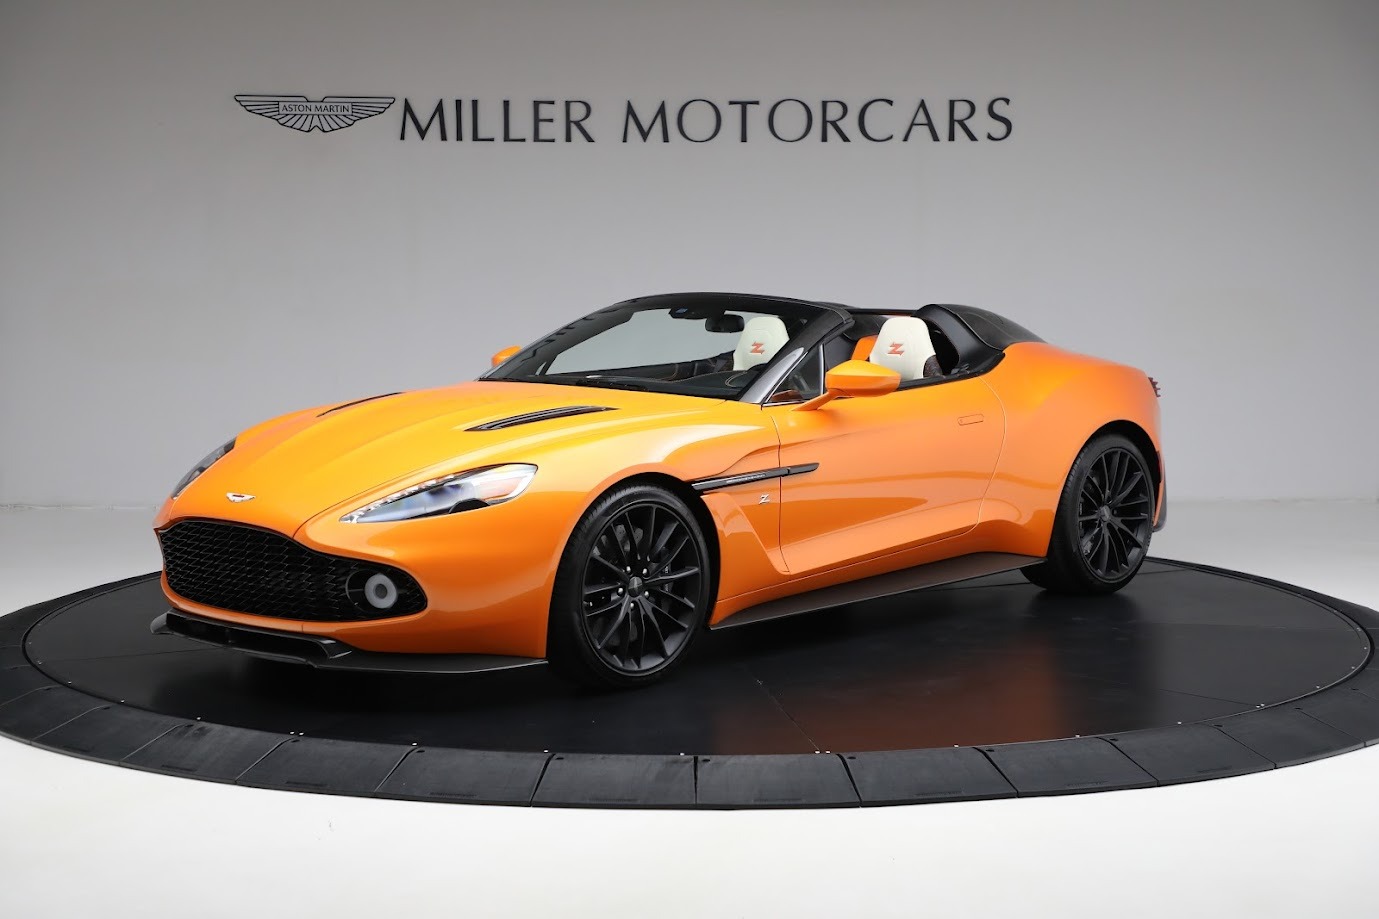 Used 2018 Aston Martin Vanquish Zagato Speedster for sale Call for price at Maserati of Westport in Westport CT 06880 1